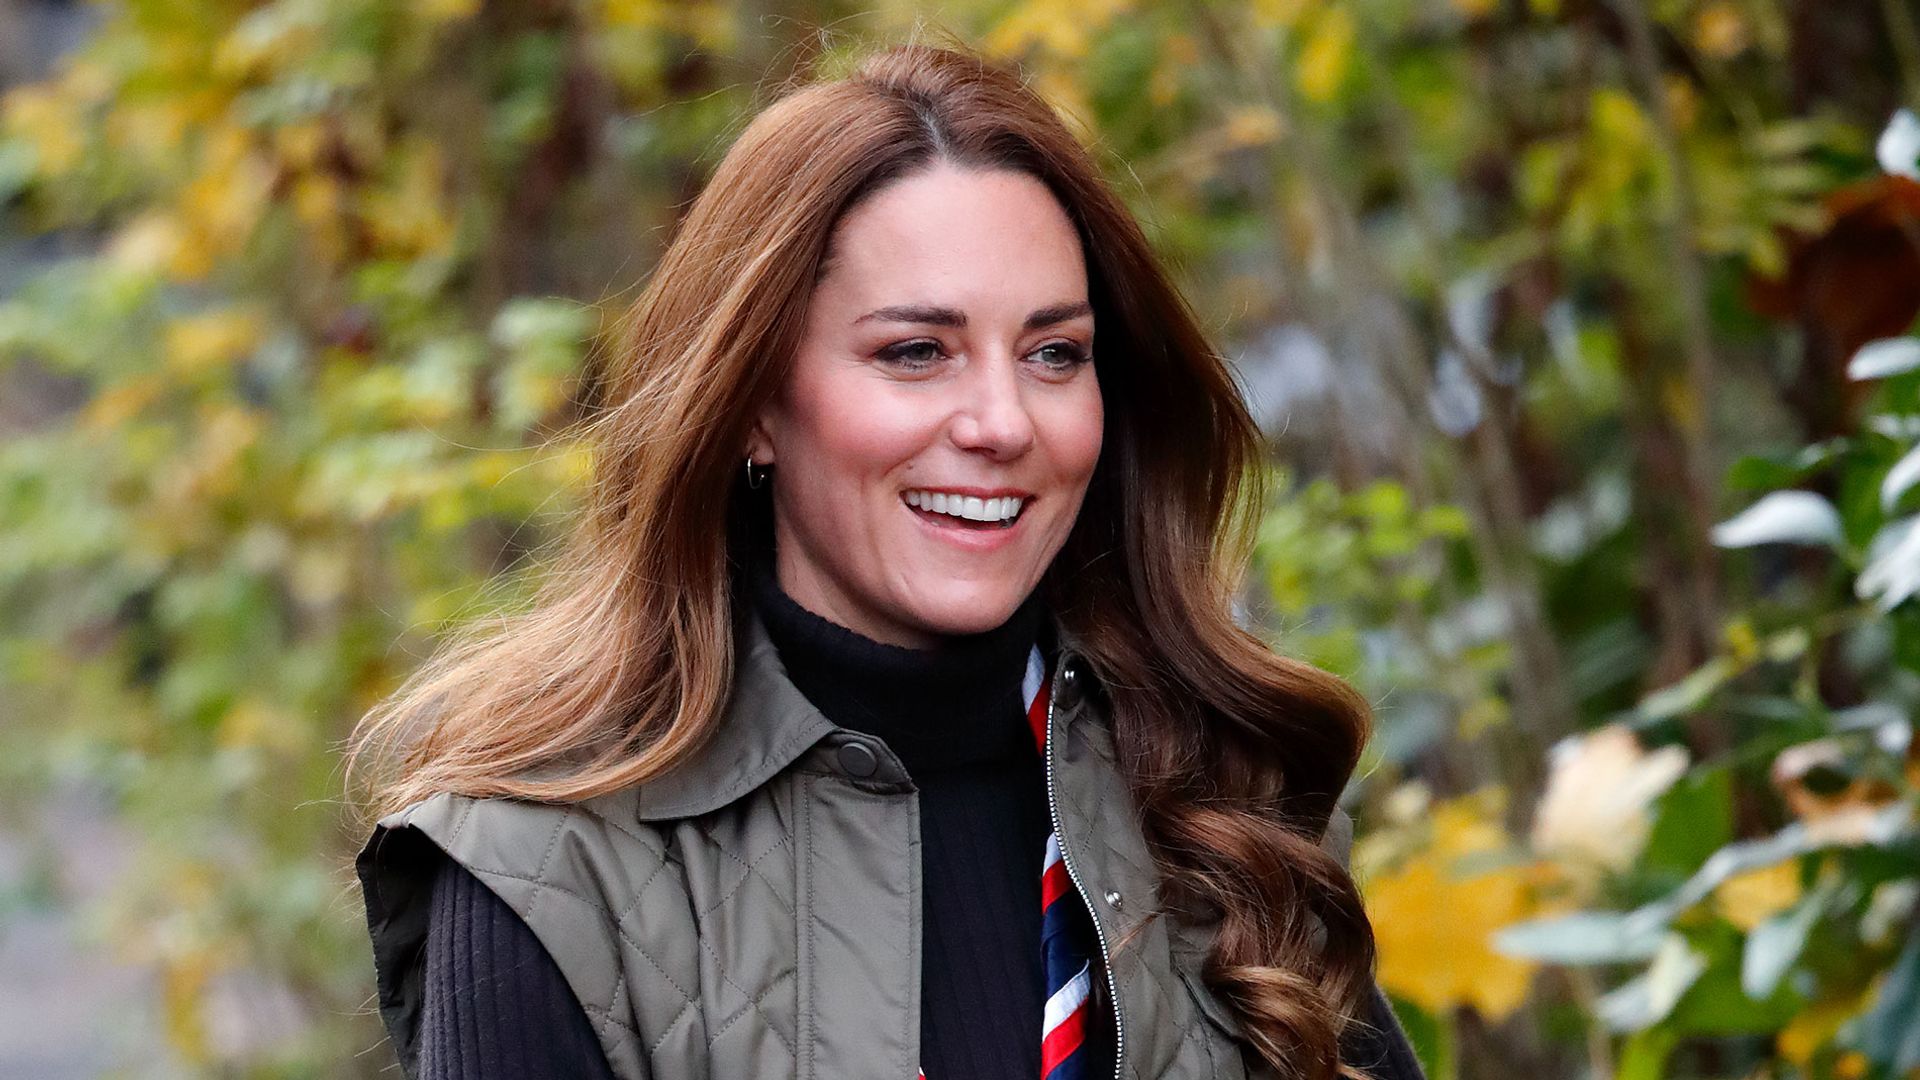 Princess Kate goes sporty in leggings and relaxed hoodie for outing with Prince William near Windsor